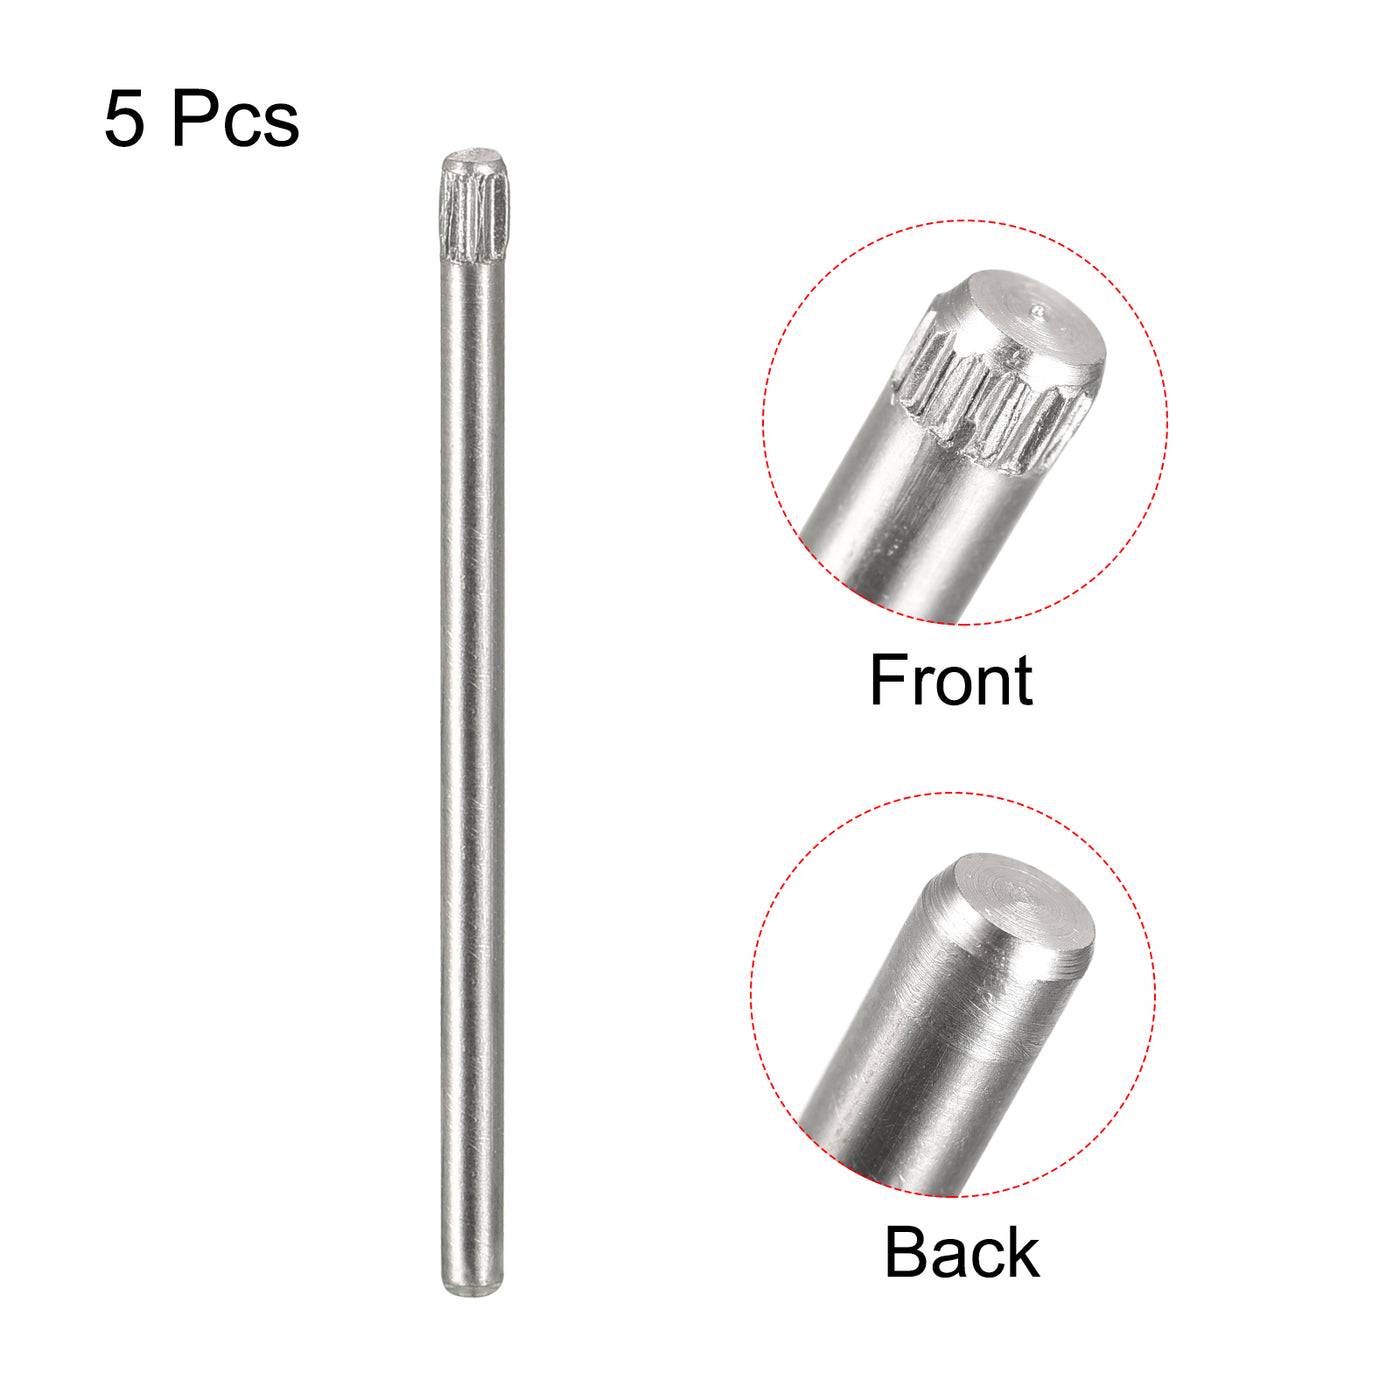 uxcell Uxcell 1.5x30mm 304 Stainless Steel Dowel Pins, 5Pcs Knurled Head Flat End Dowel Pin